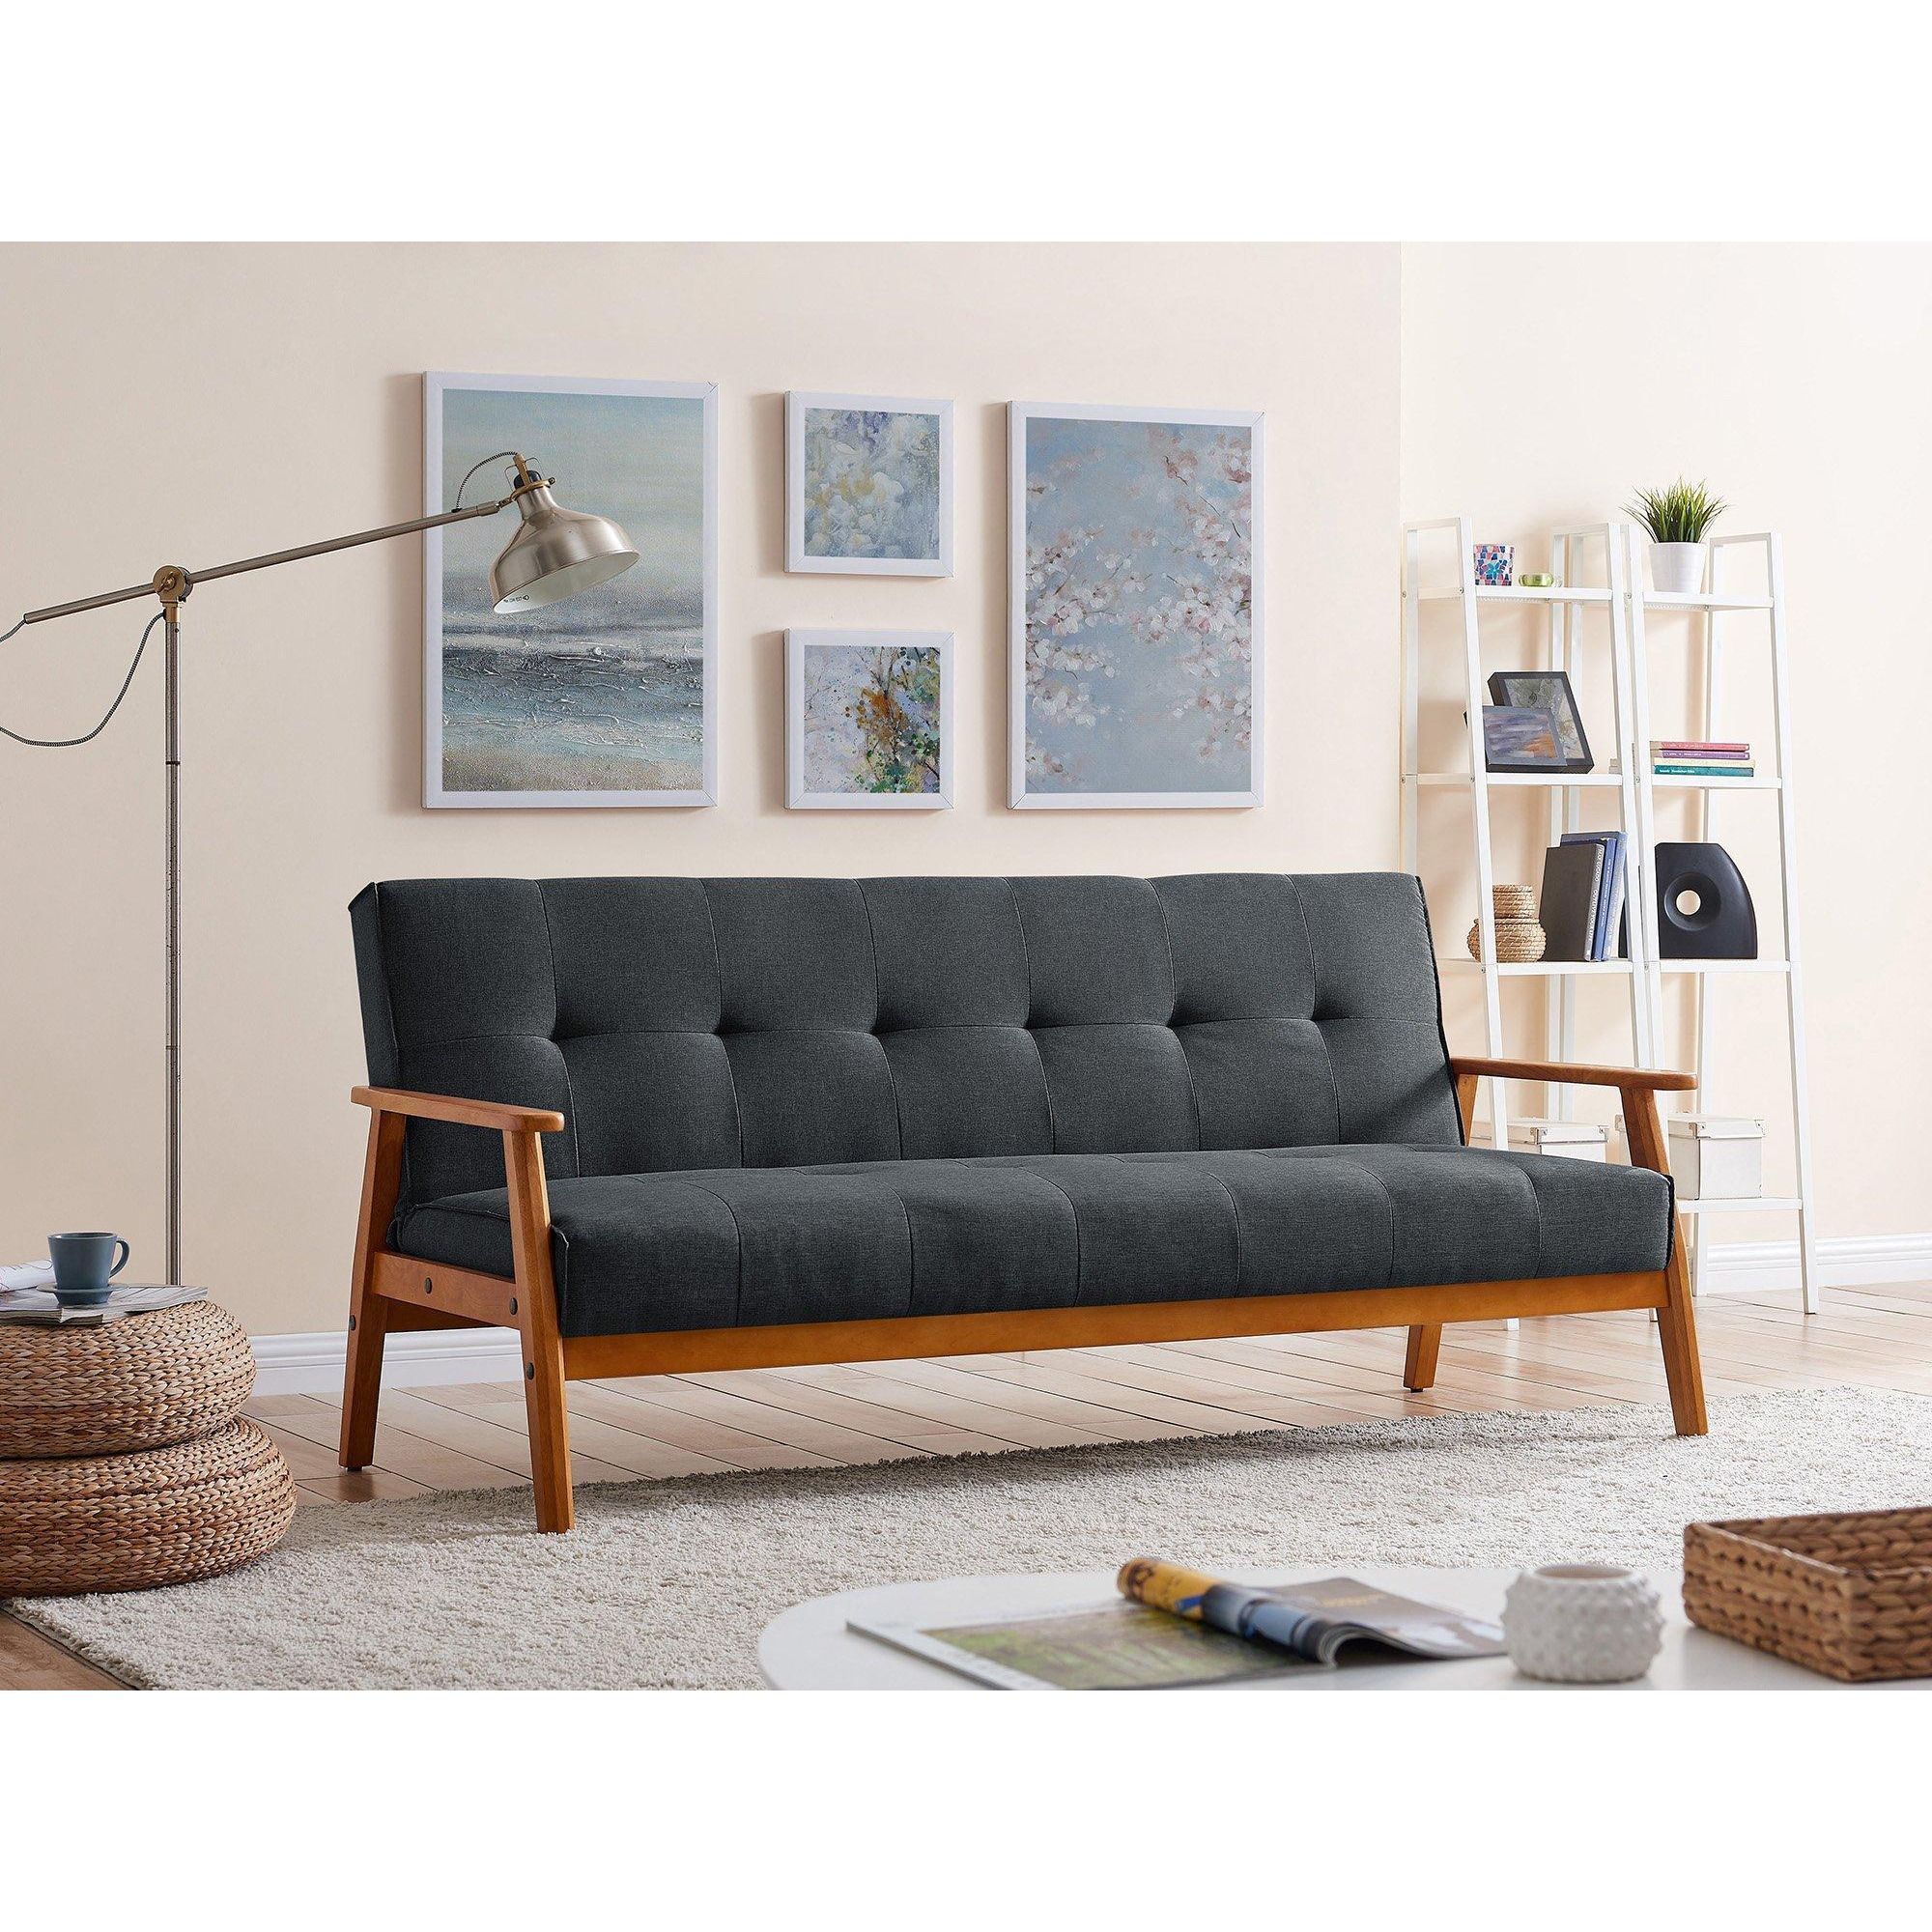 Langford Fabric Sofa Bed Scandinavian Style with Wooden Armrests and Legs - image 1